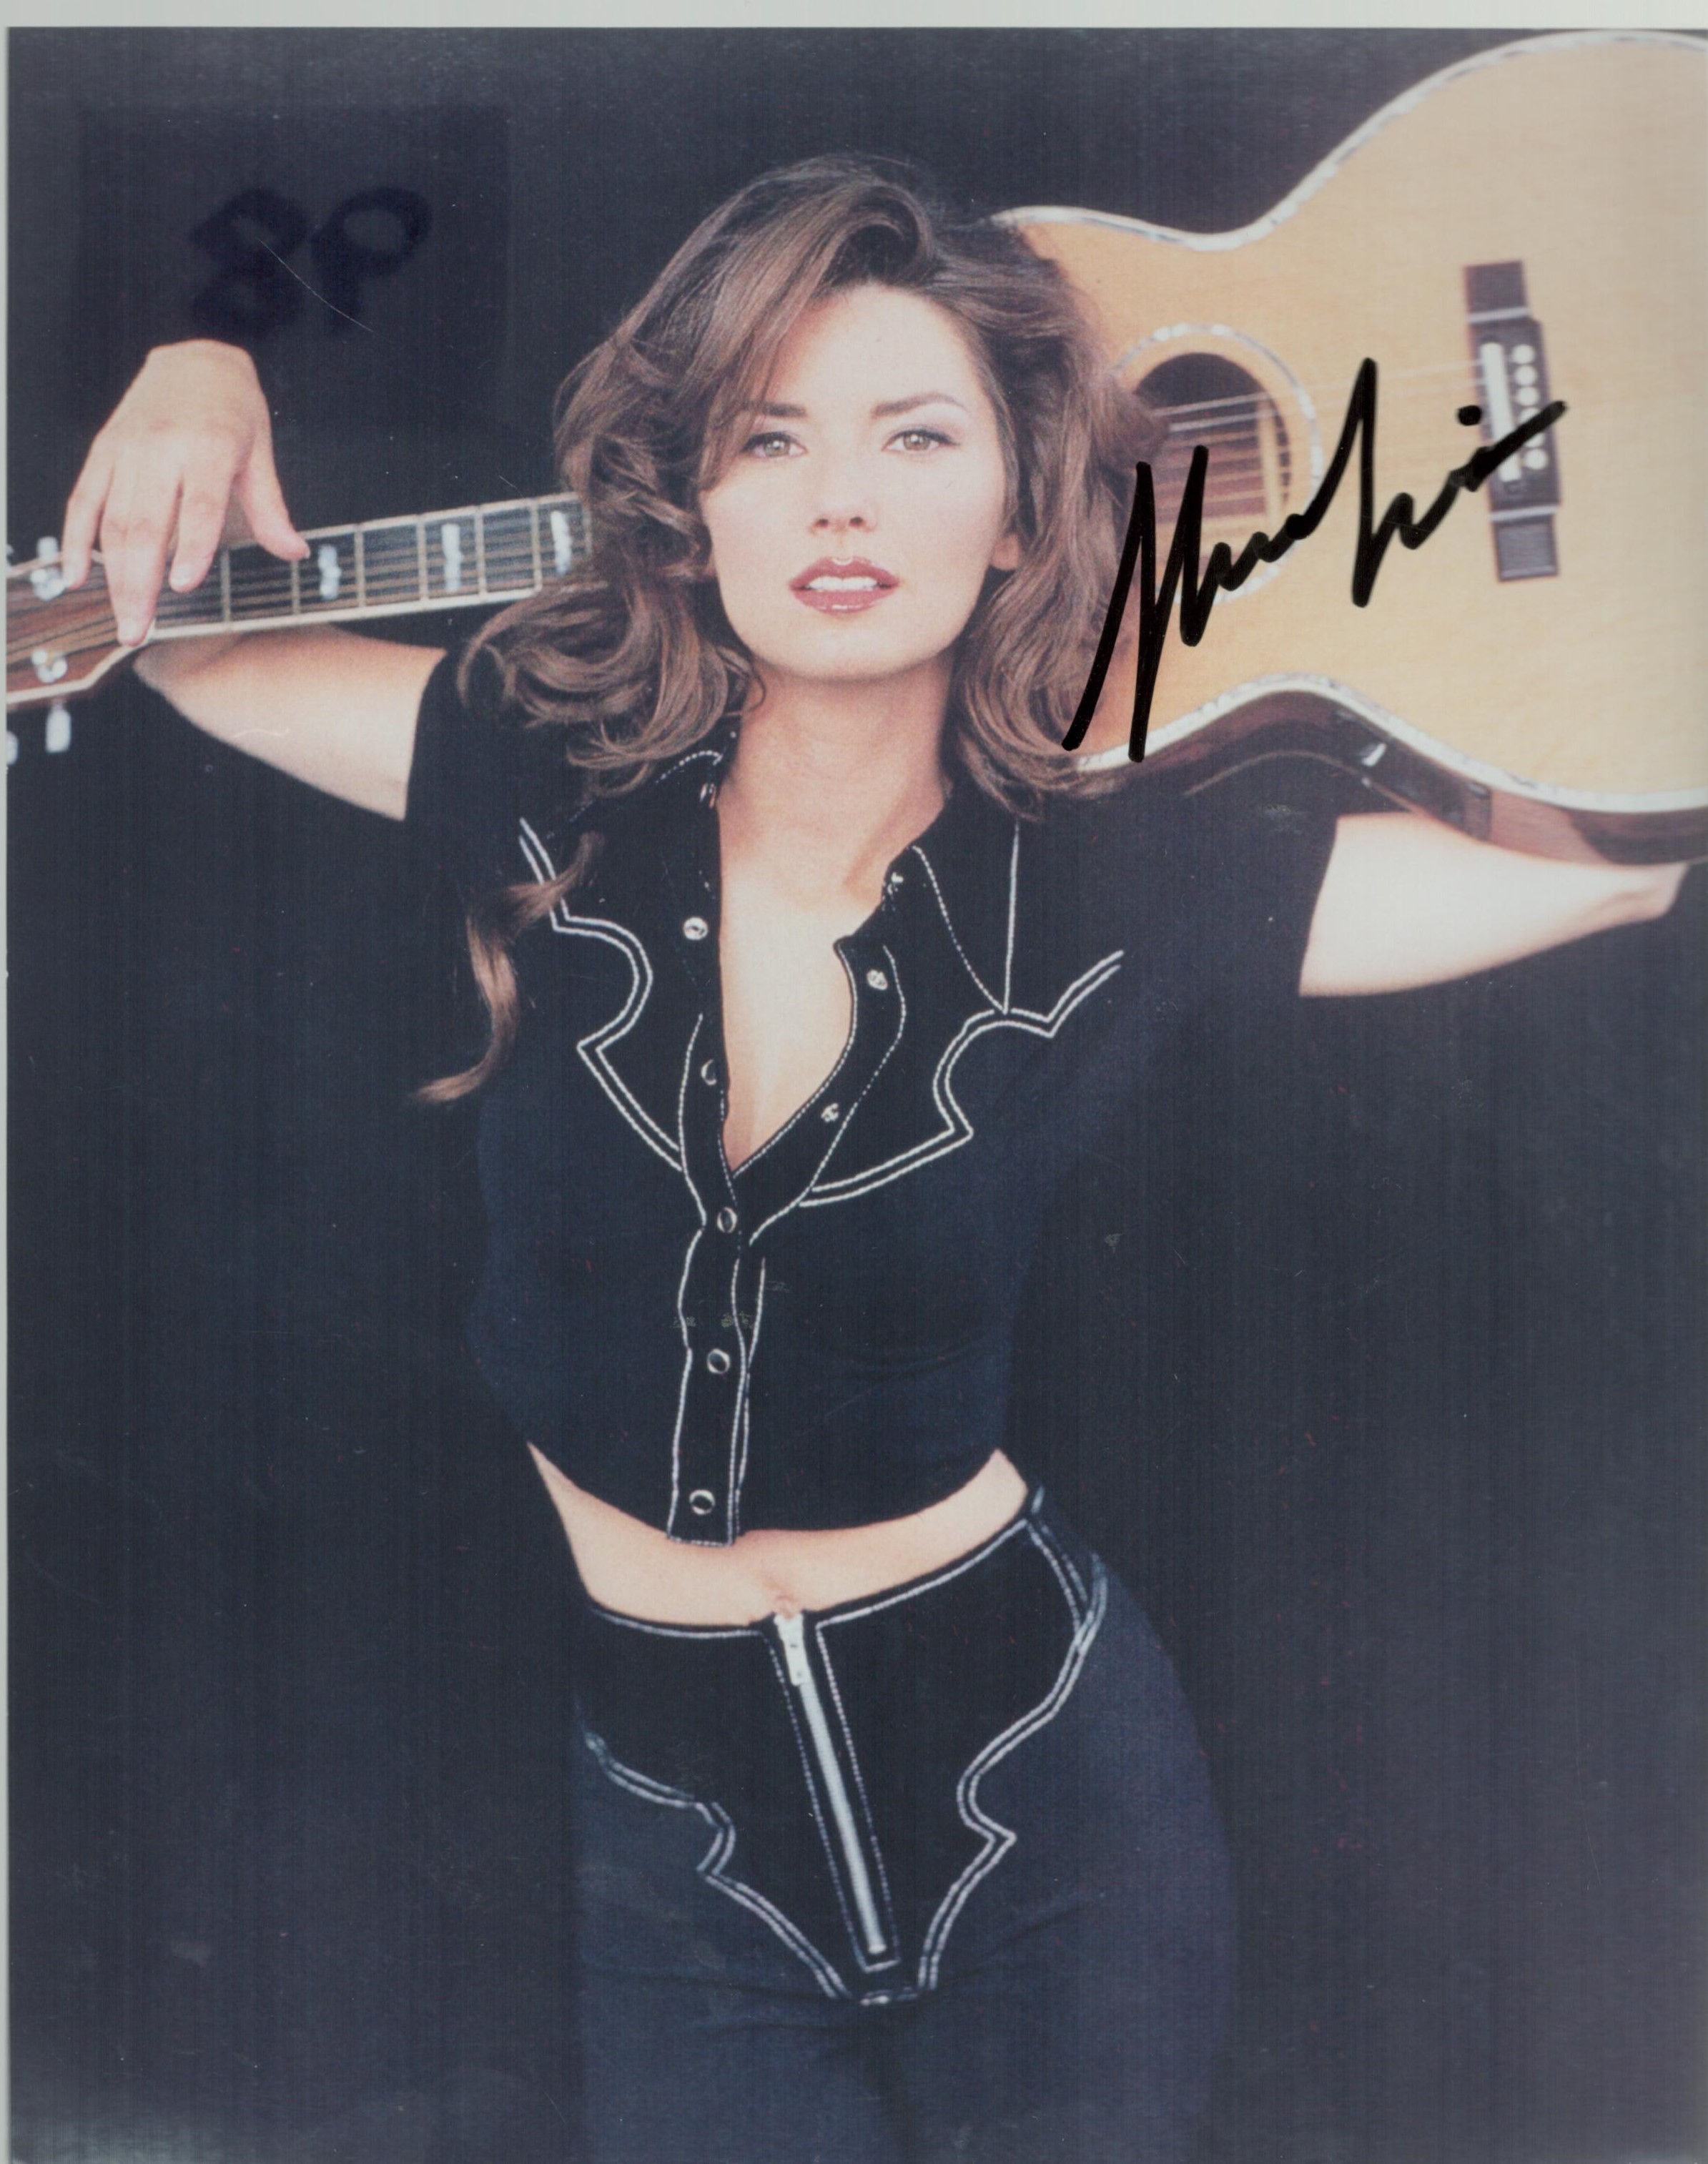 Shania Twain signed 10x8 colour photo. Good condition. All autographs come with a Certificate of